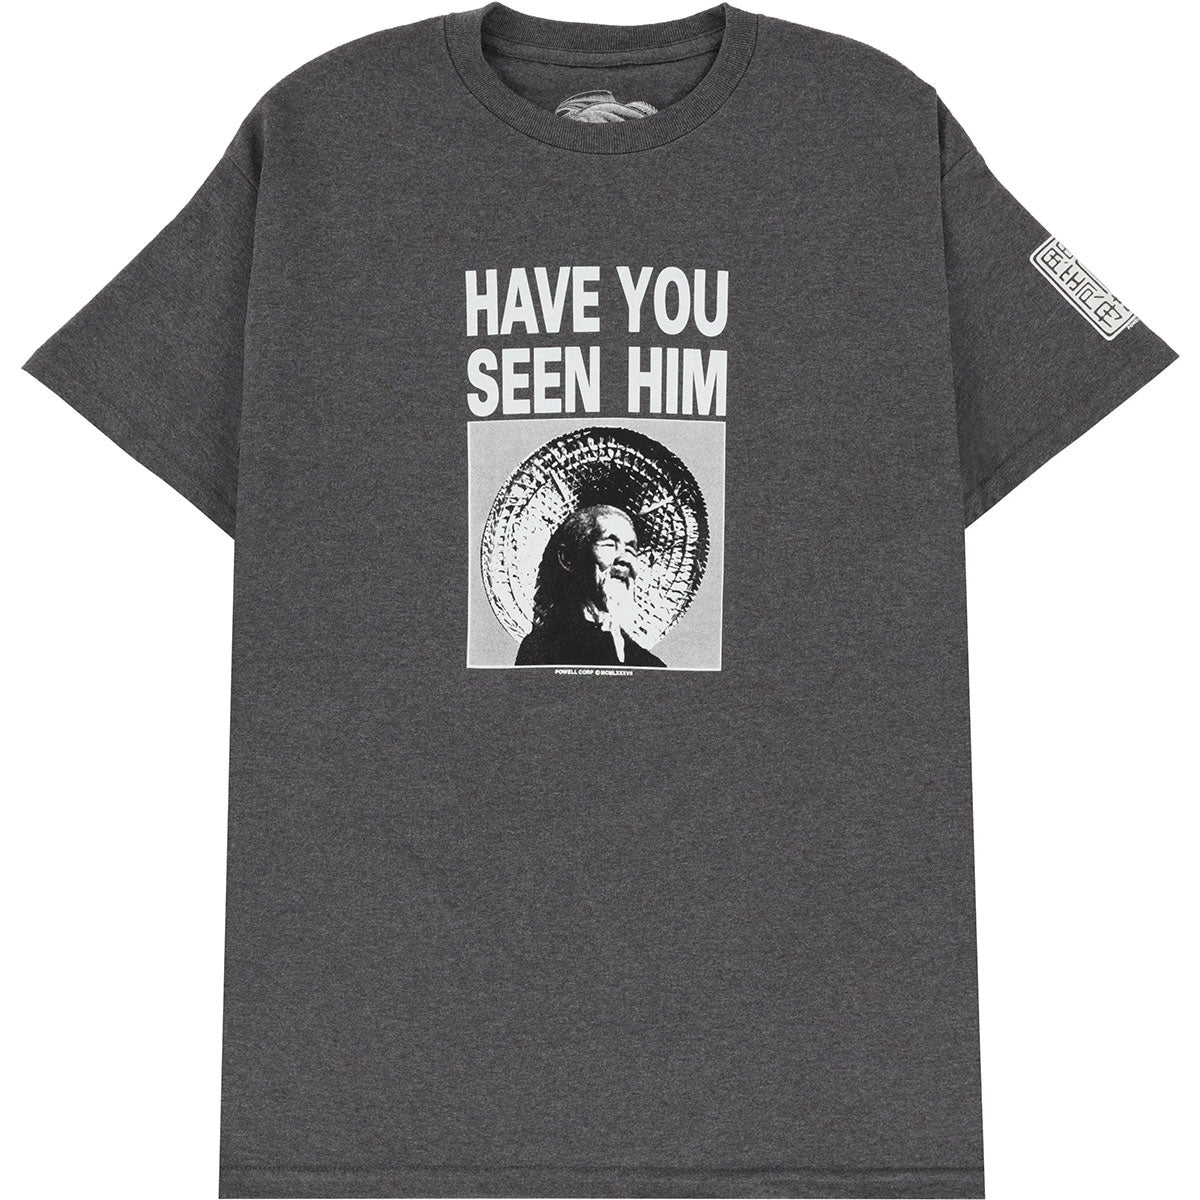 Powell-Peralta Animal Chin Have You Seen Him T-Shirt - Tweed image 1